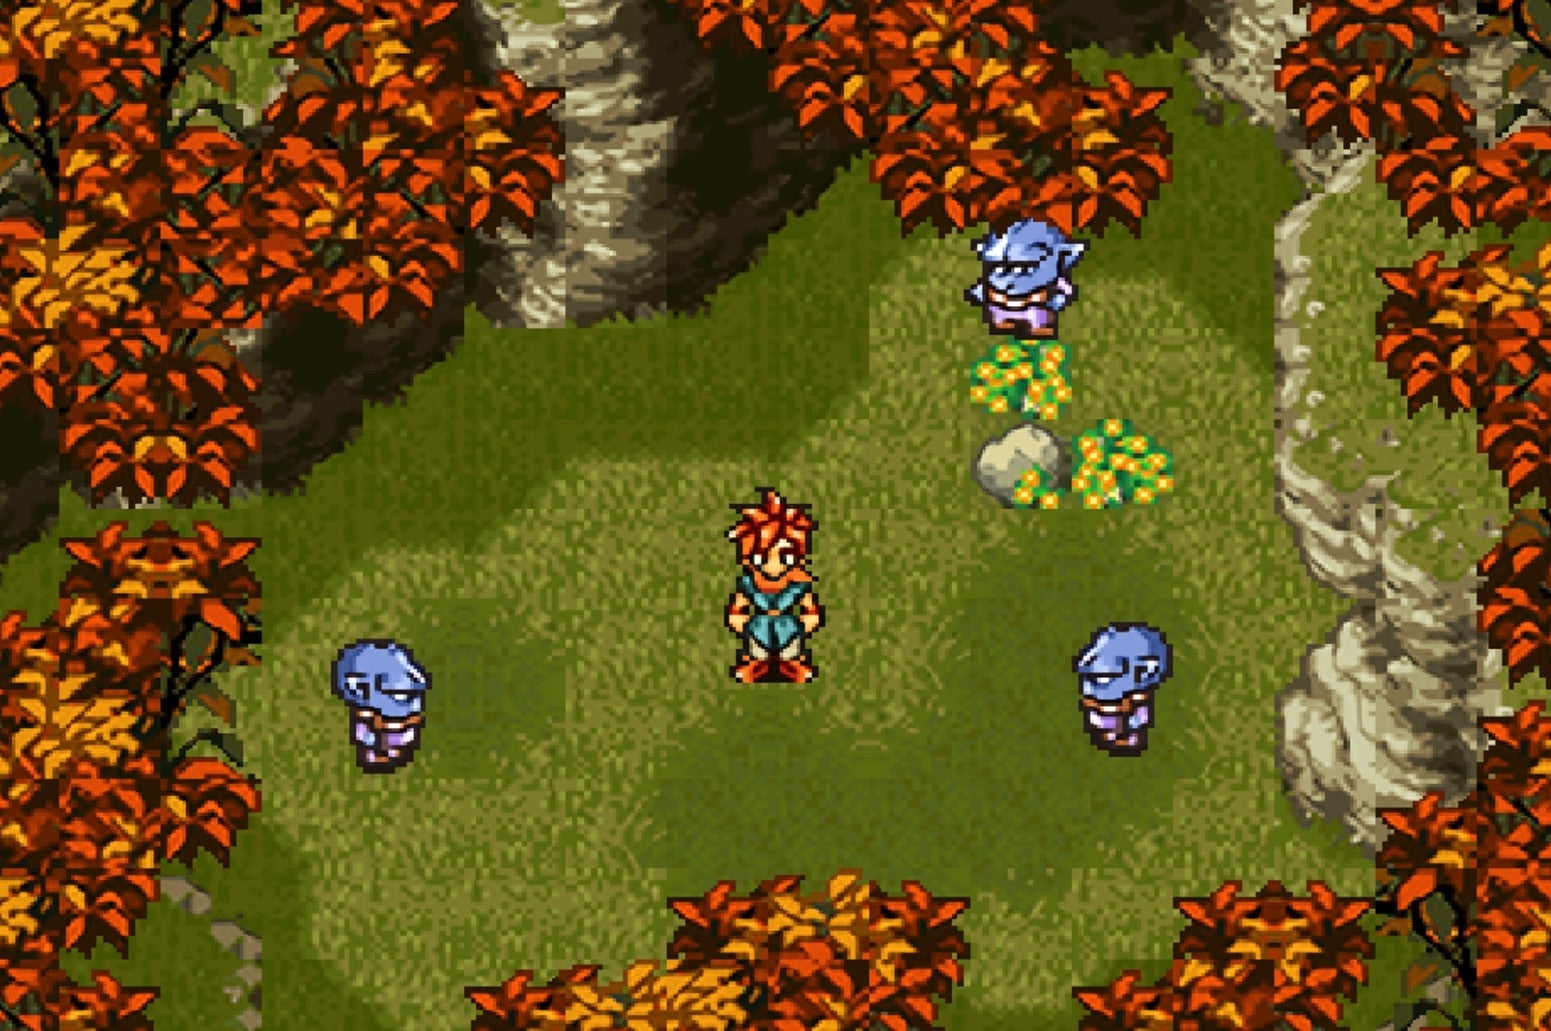 Image for Square's classic Super Nintendo RPG Chrono Trigger is now available on PC